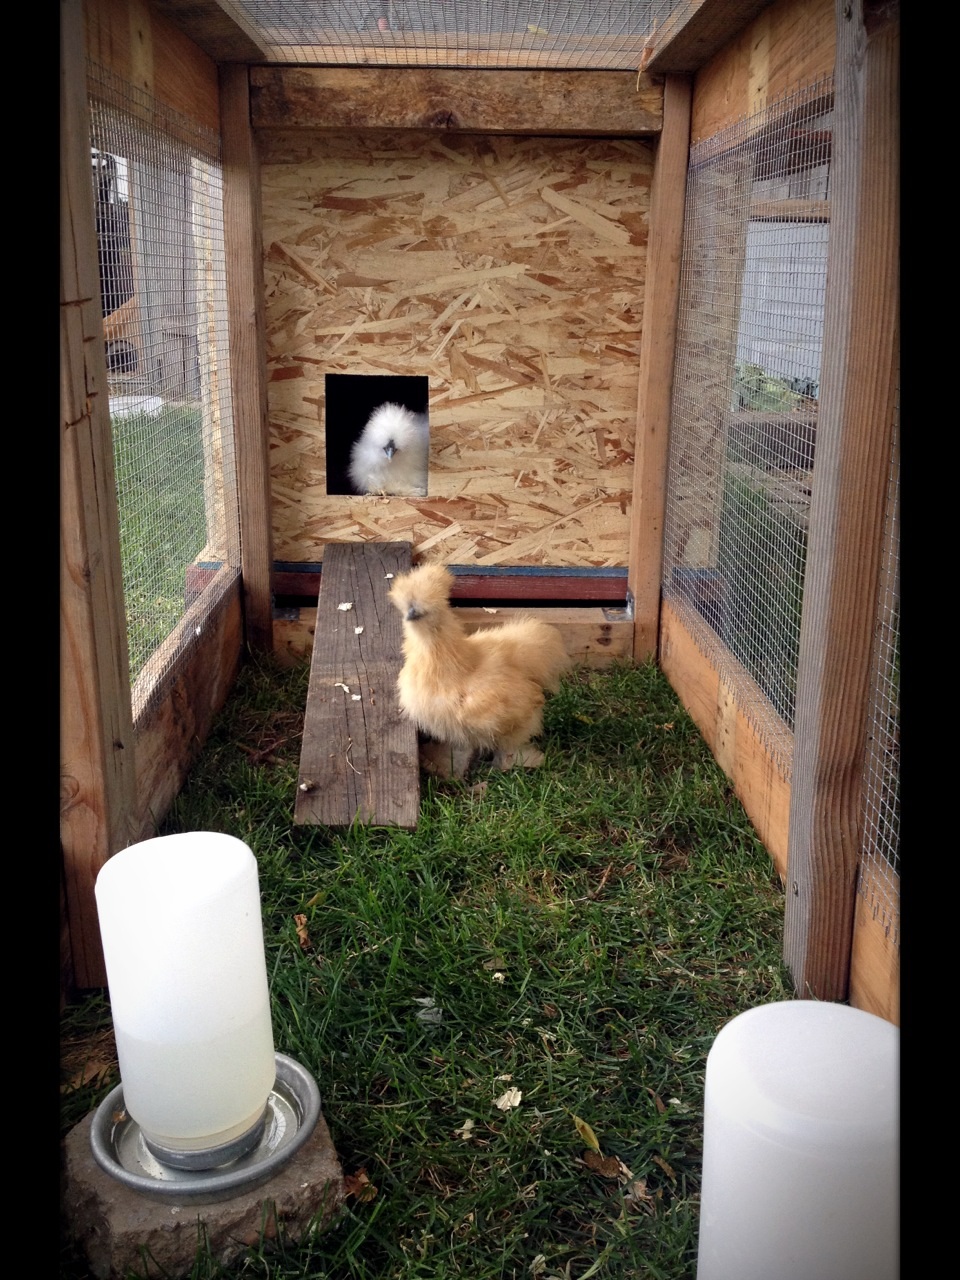 The silkies in their new (almost finished) mini-coop. They seem to really enjoy it so far! There is still plenty to do, but it's at least secure and live-able, and it seemed like a good idea to get them out there in an unfinished but secure coop rather than keep them in the dog crate we had them in.